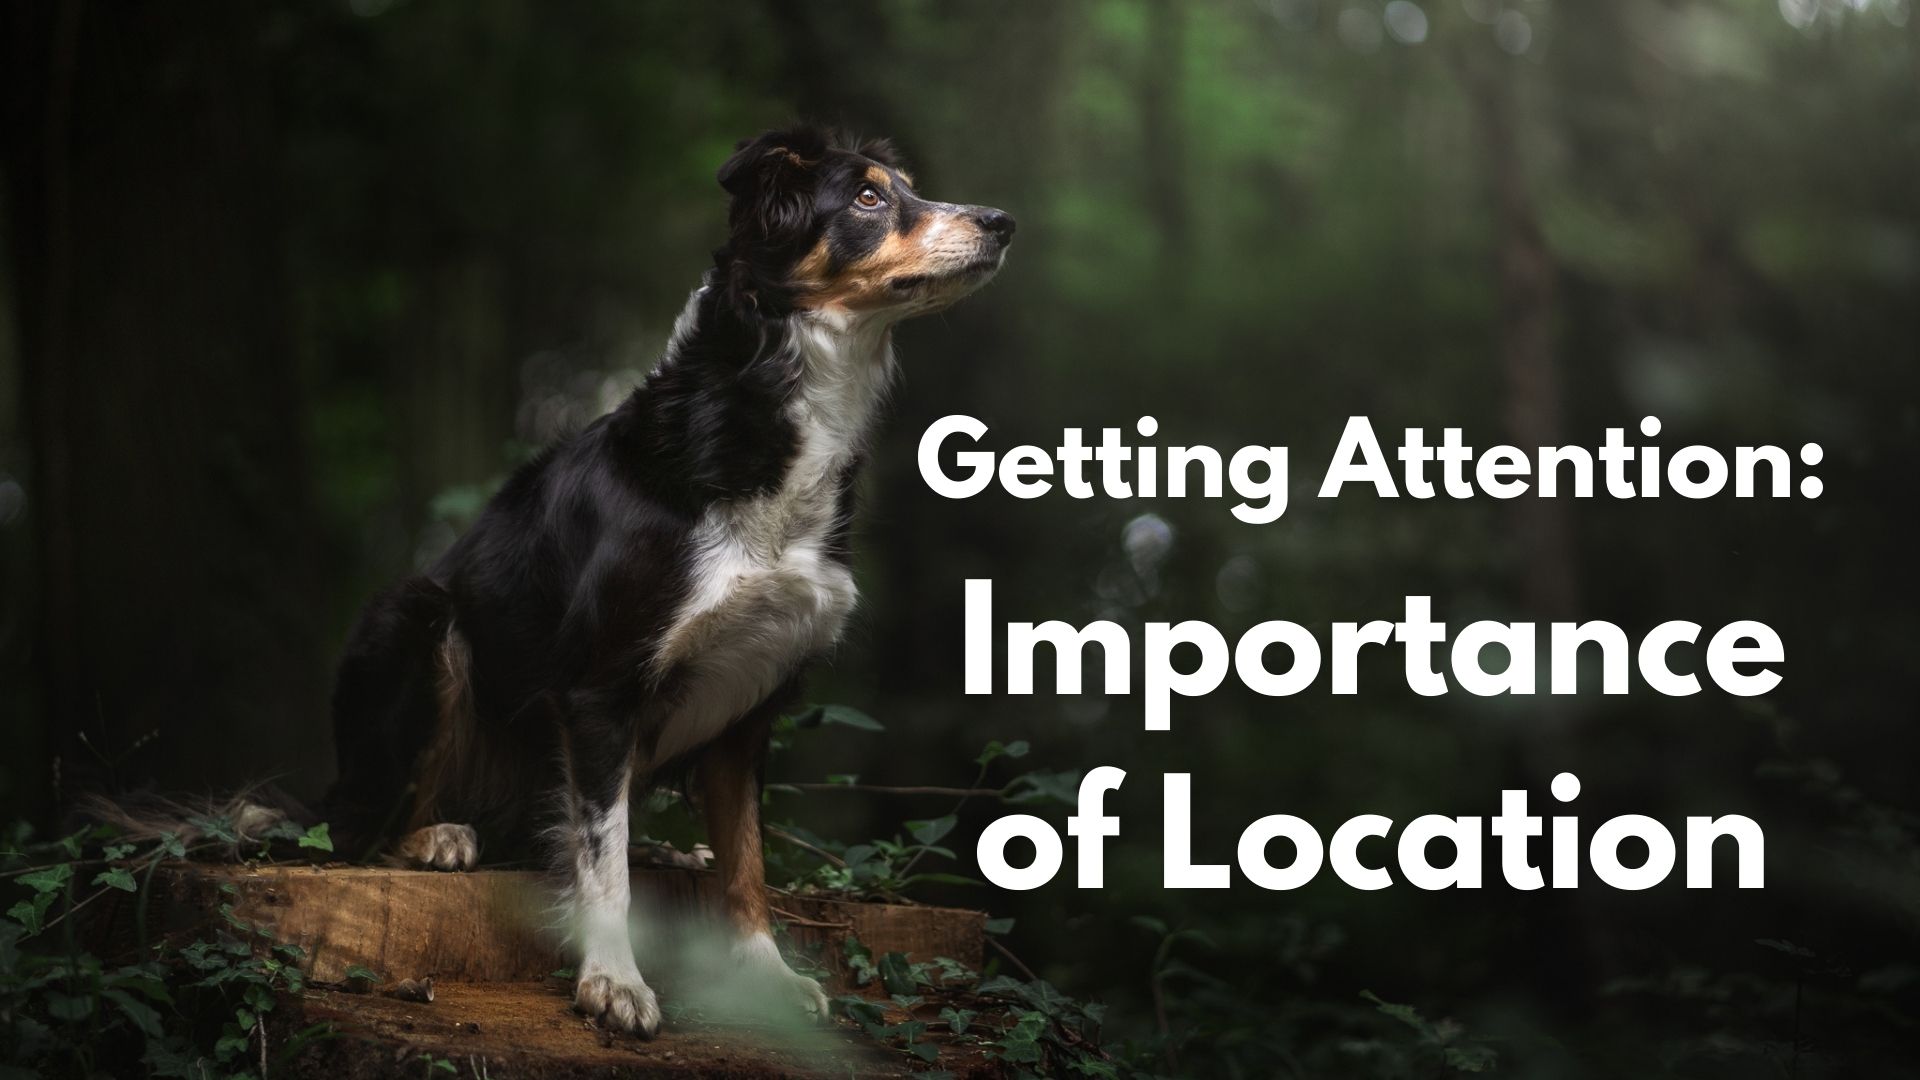 Getting Attention: Importance of Location